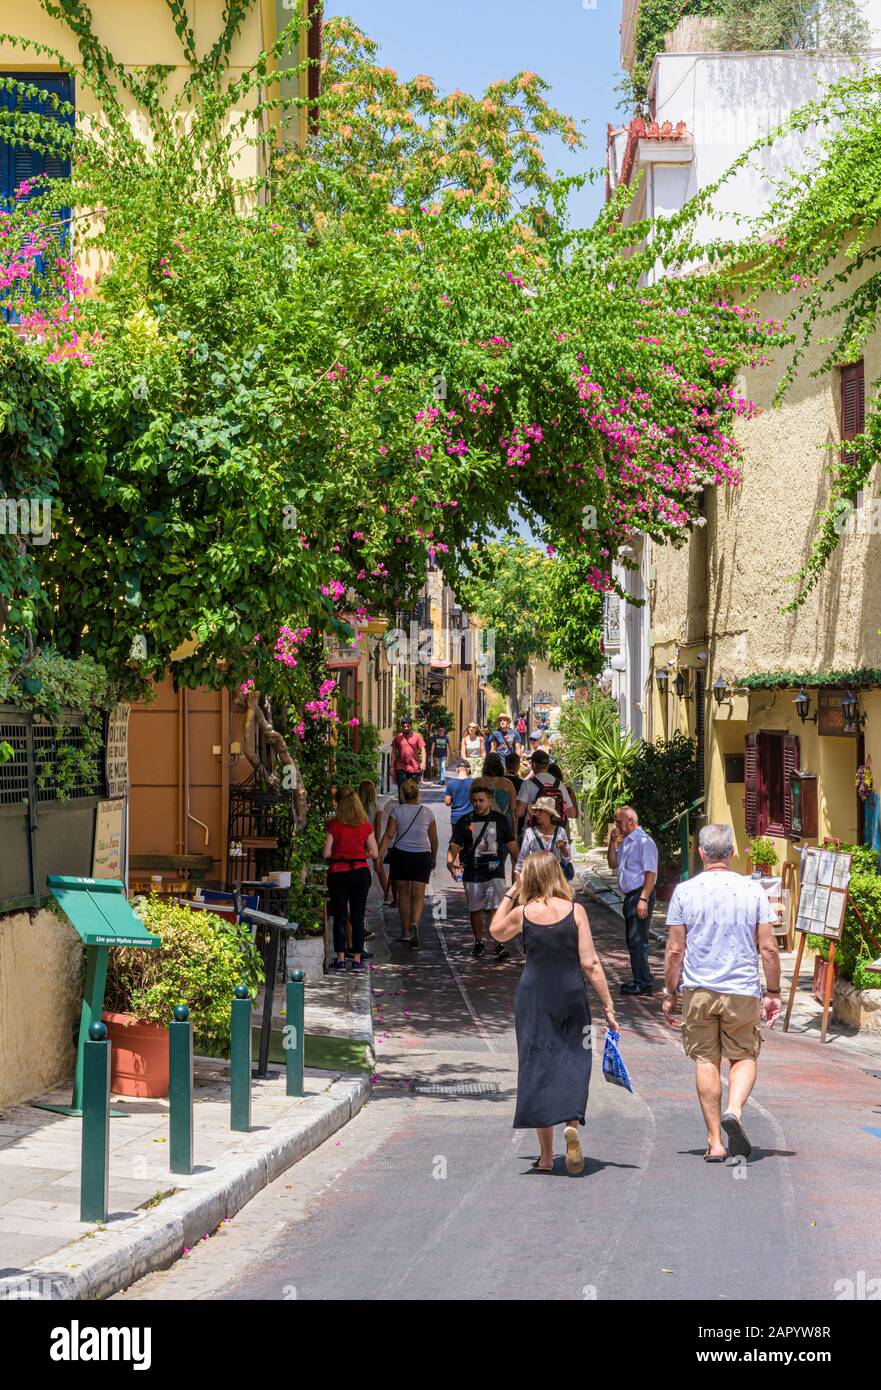 Bougainvillea filled streets of the old Plaka neighborhood of Athens, Greece Stock Photo